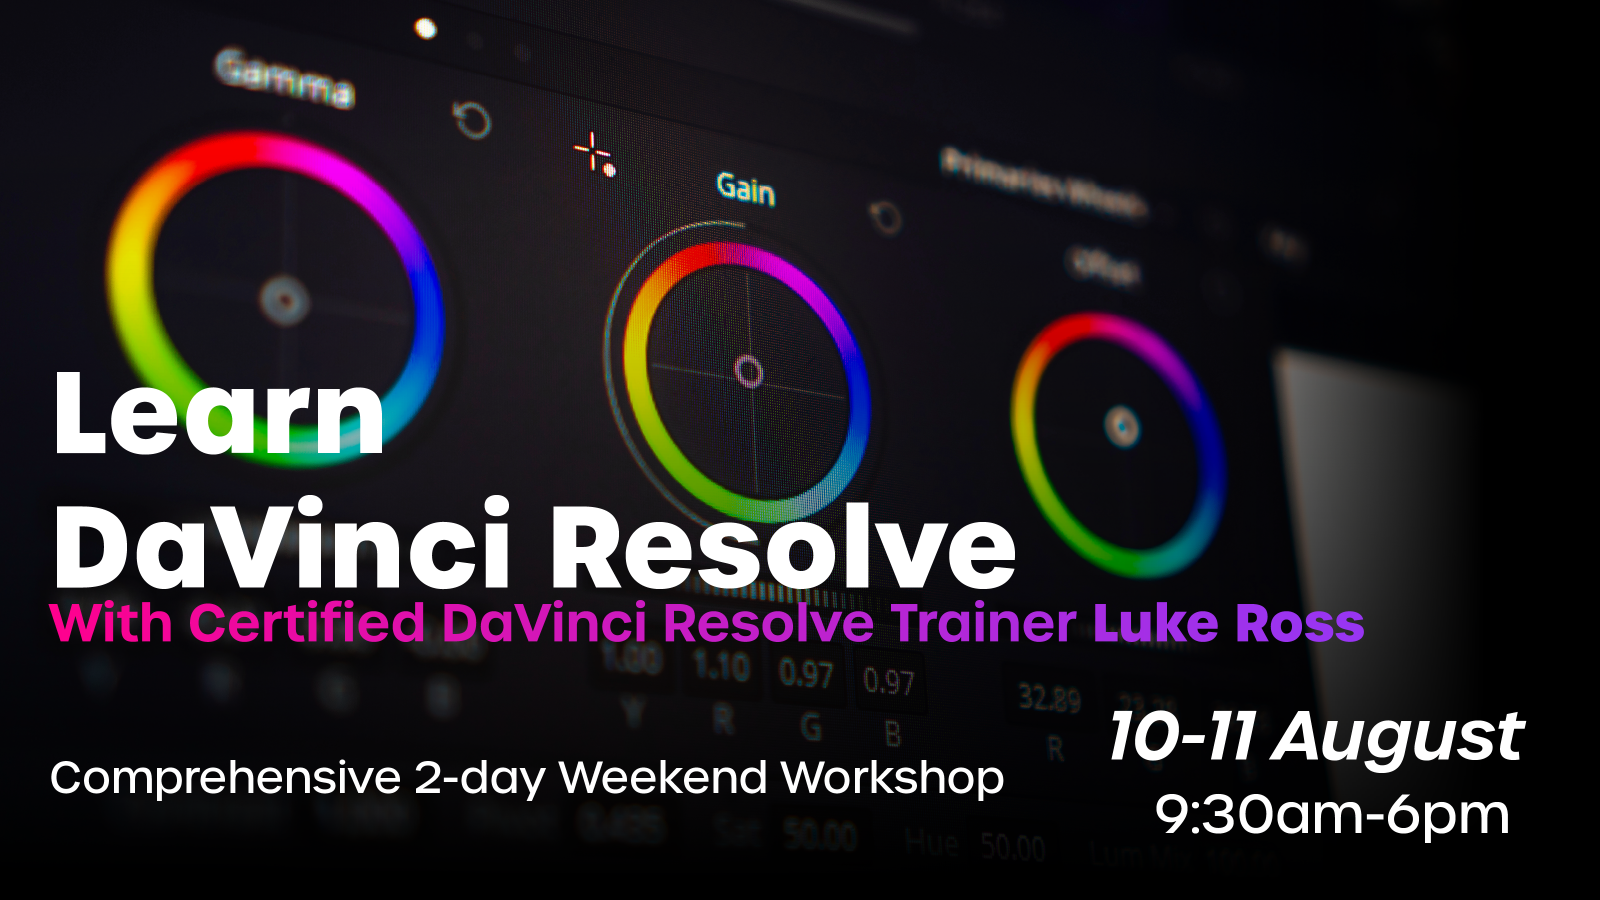 a banner with text about a training course for DaVinci Resolve